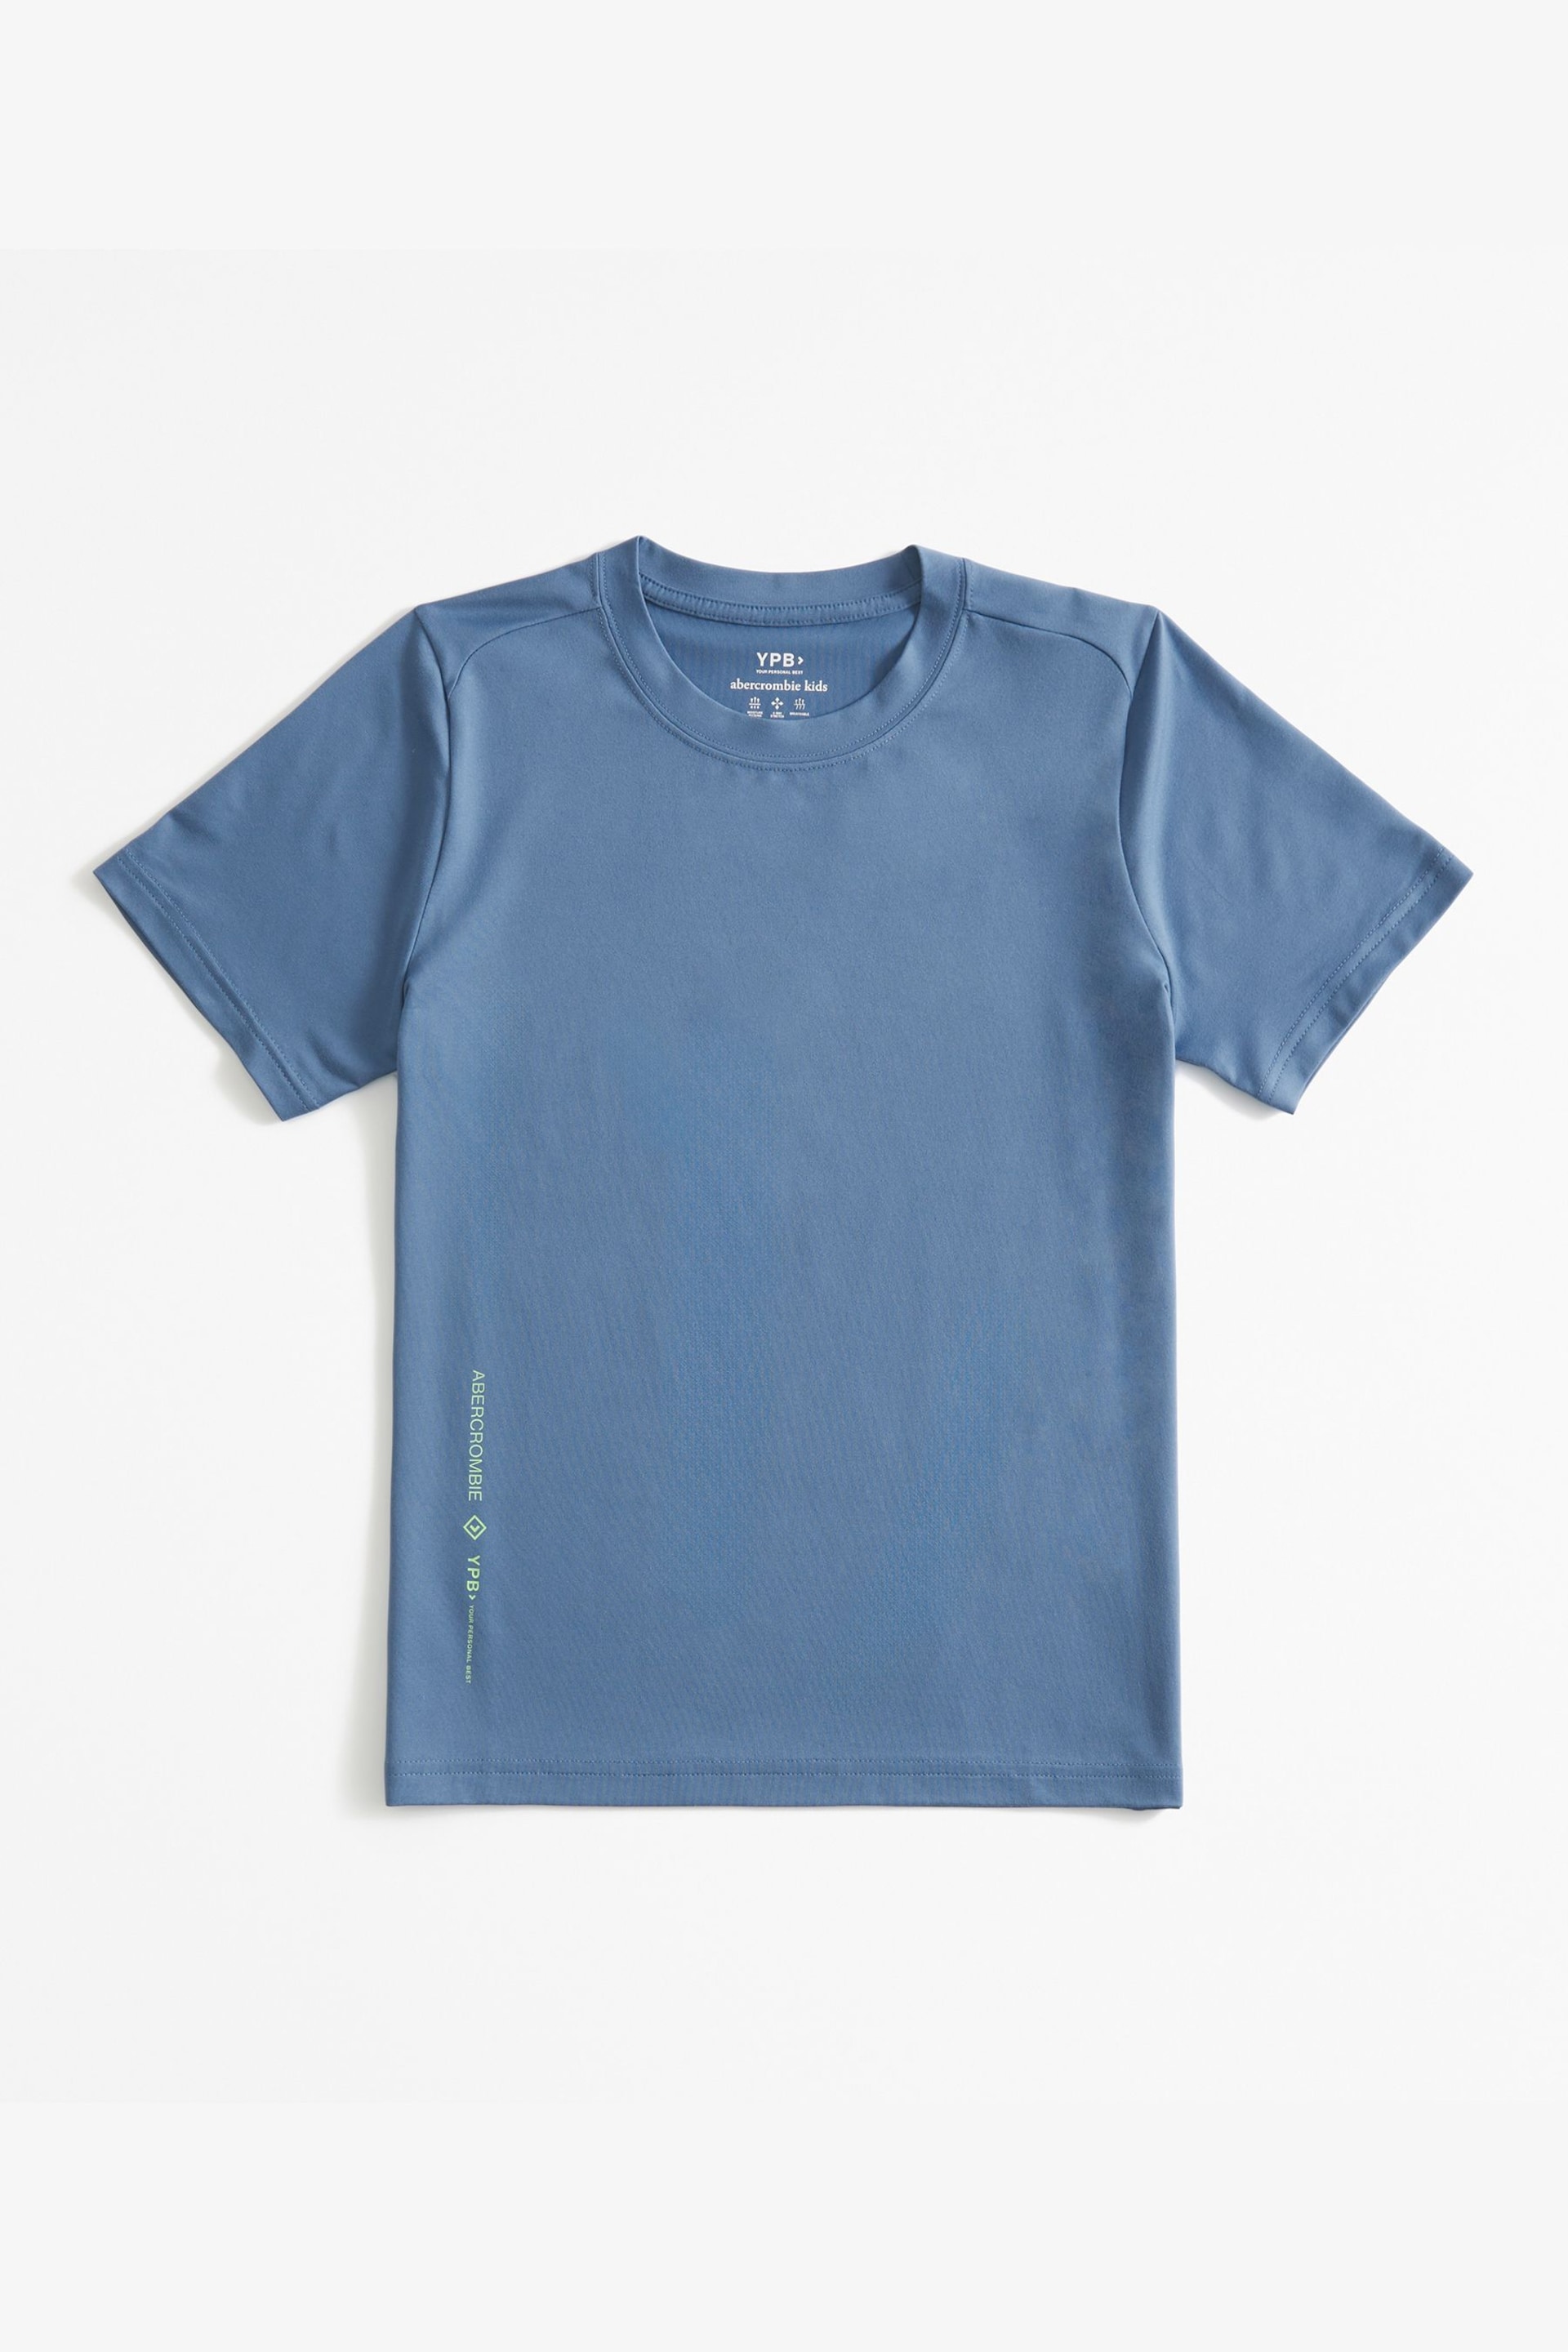 Abercrombie & Fitch Blue Active Sports Short Sleeve T-Shirt - Image 1 of 2